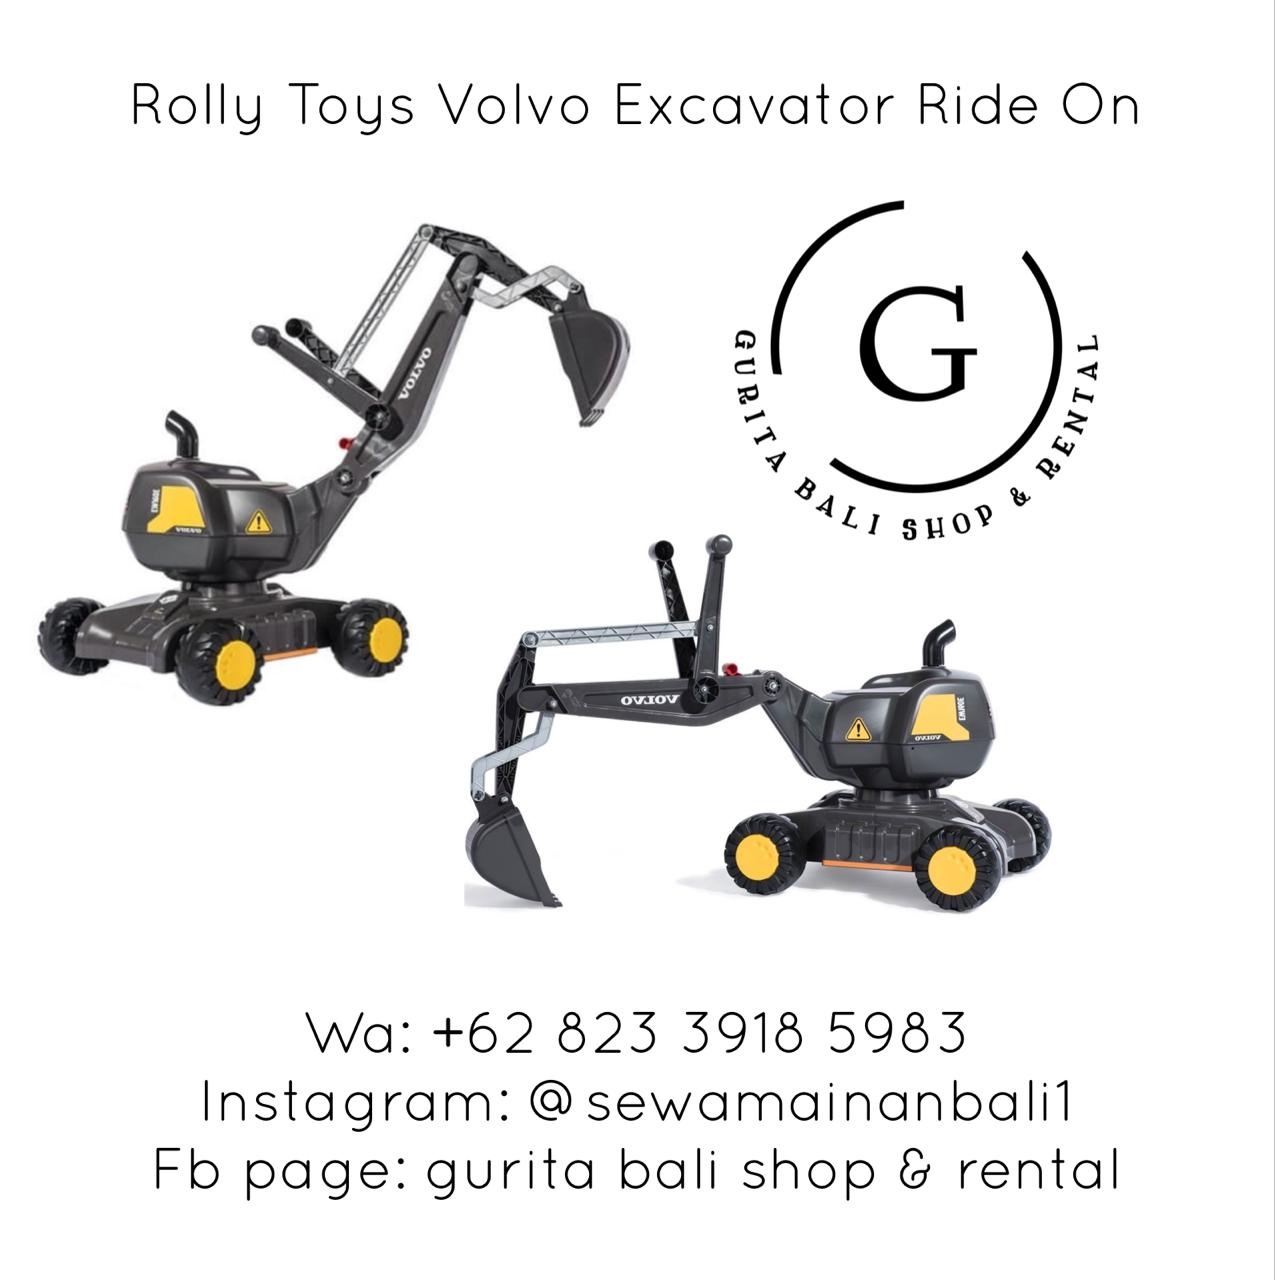 ROLLY TOYS VOLVO EXCAVATOR RIDE ON